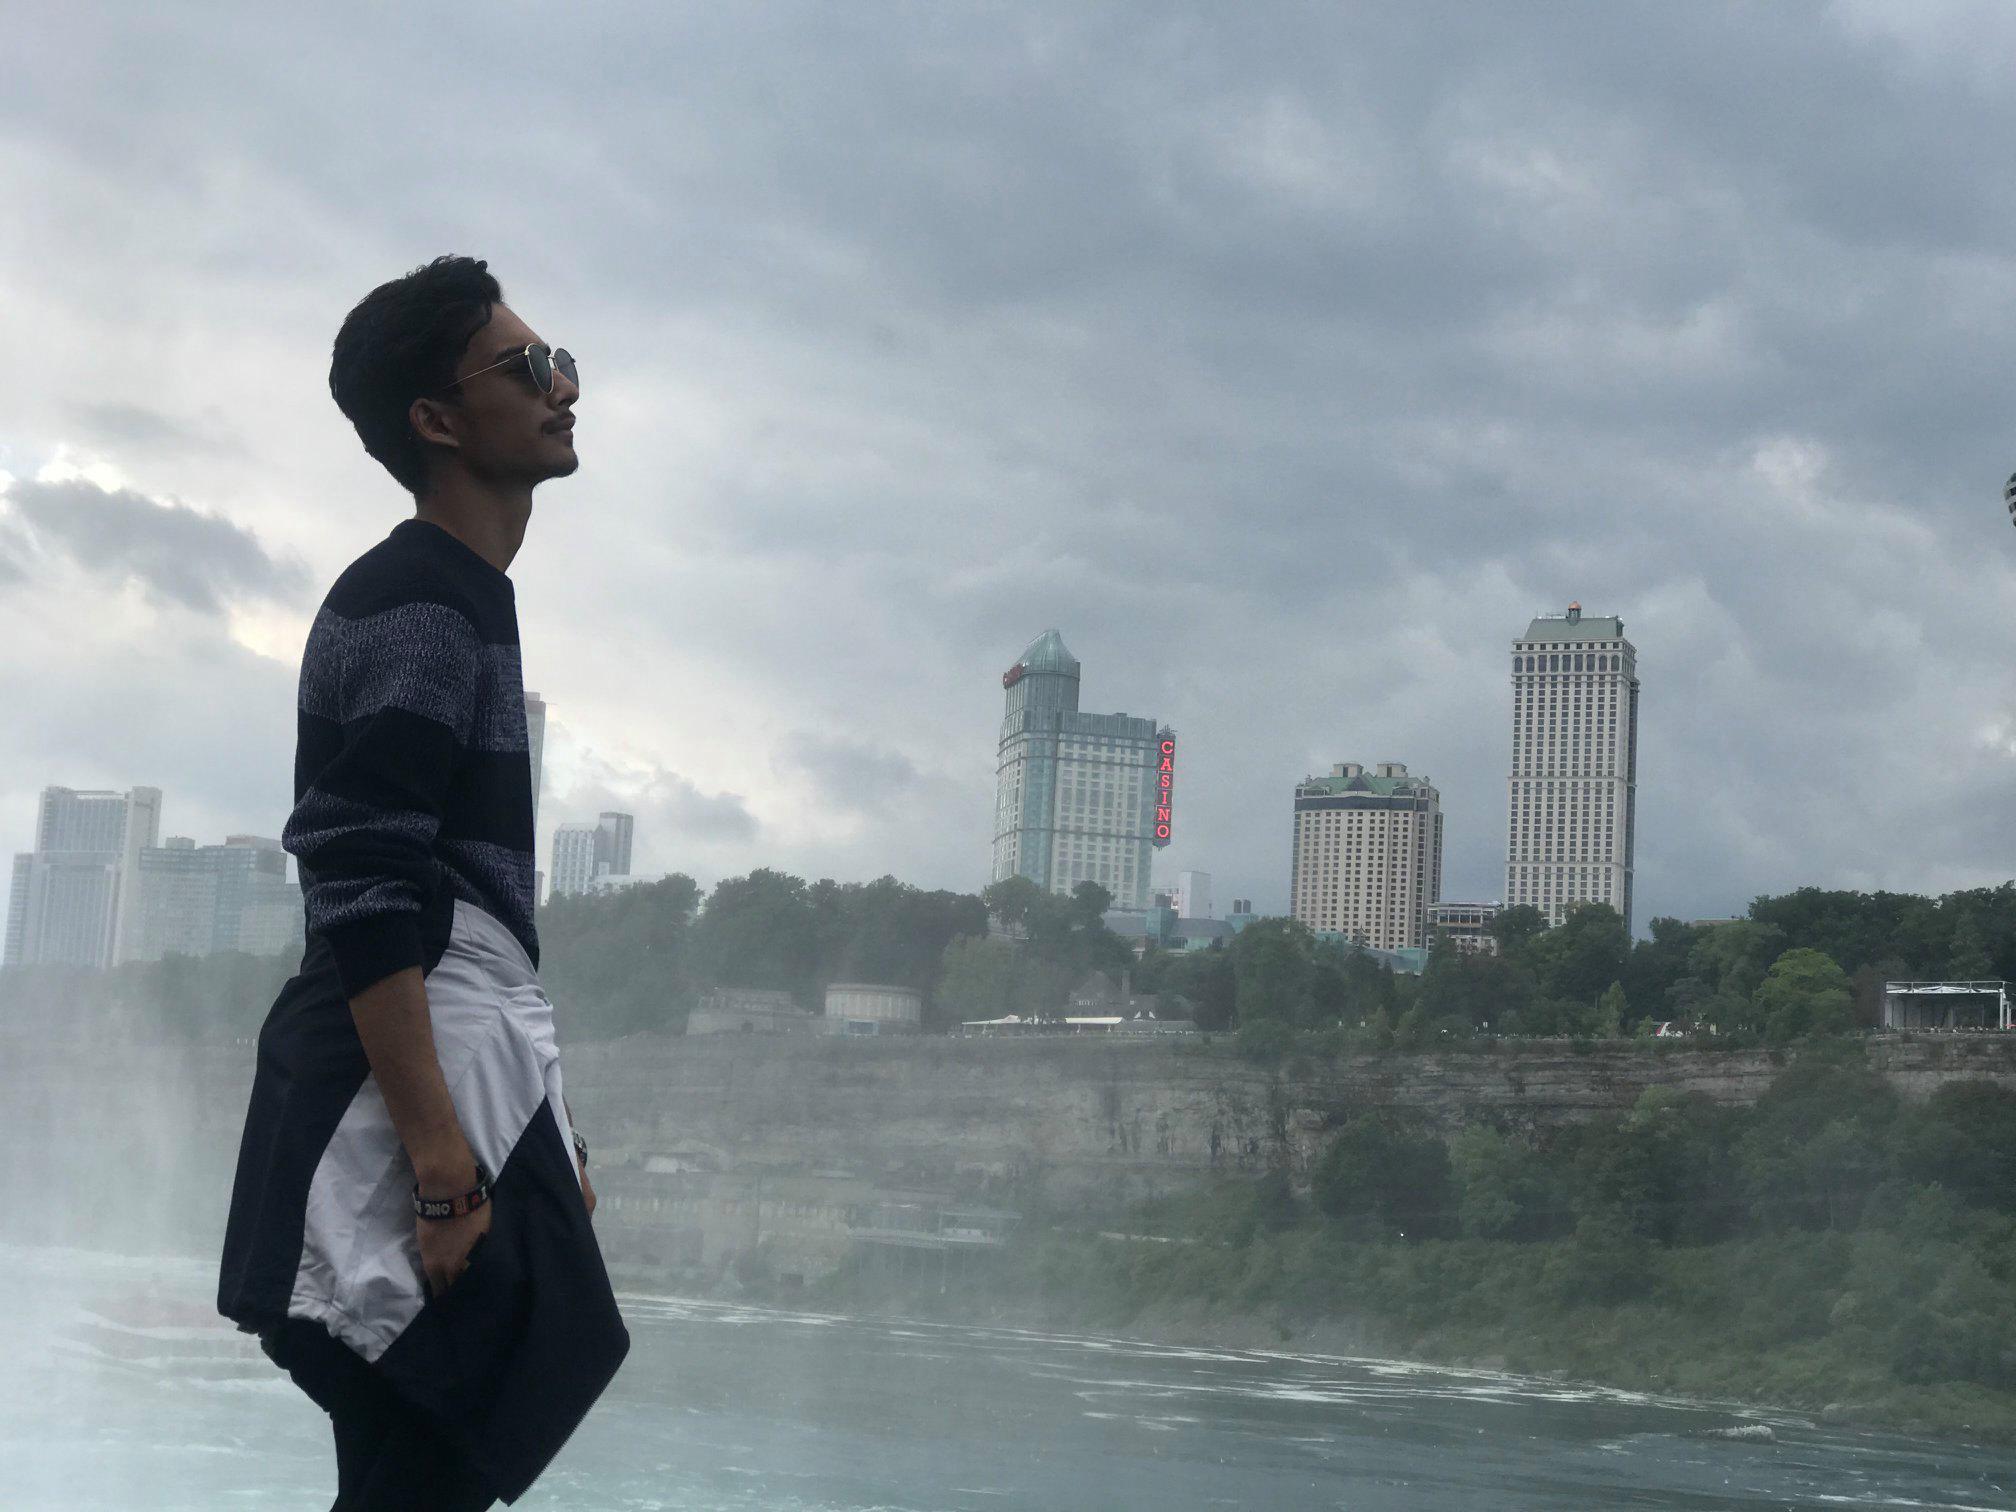 Biology major Kaushal Joshi from Nepal is shown during an international student trip to Canada in fall 2019